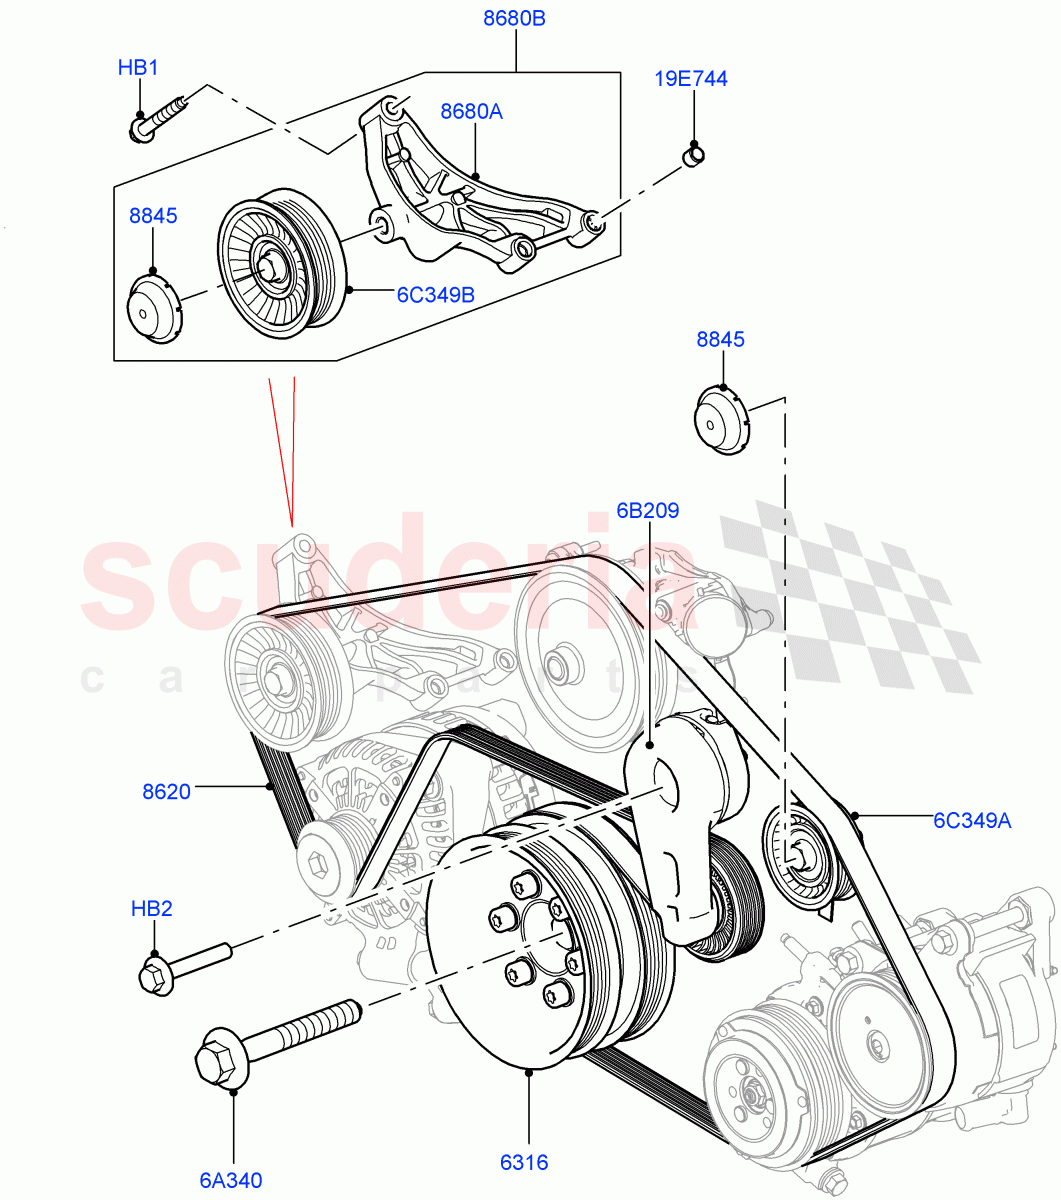 Pulleys And Drive Belts(Primary Drive)(5.0 Petrol AJ133 DOHC CDA,With ACE Suspension,5.0L P AJ133 DOHC CDA S/C Enhanced)((V)FROMJA000001,(V)TOJA999999) of Land Rover Land Rover Range Rover (2012-2021) [5.0 OHC SGDI SC V8 Petrol]